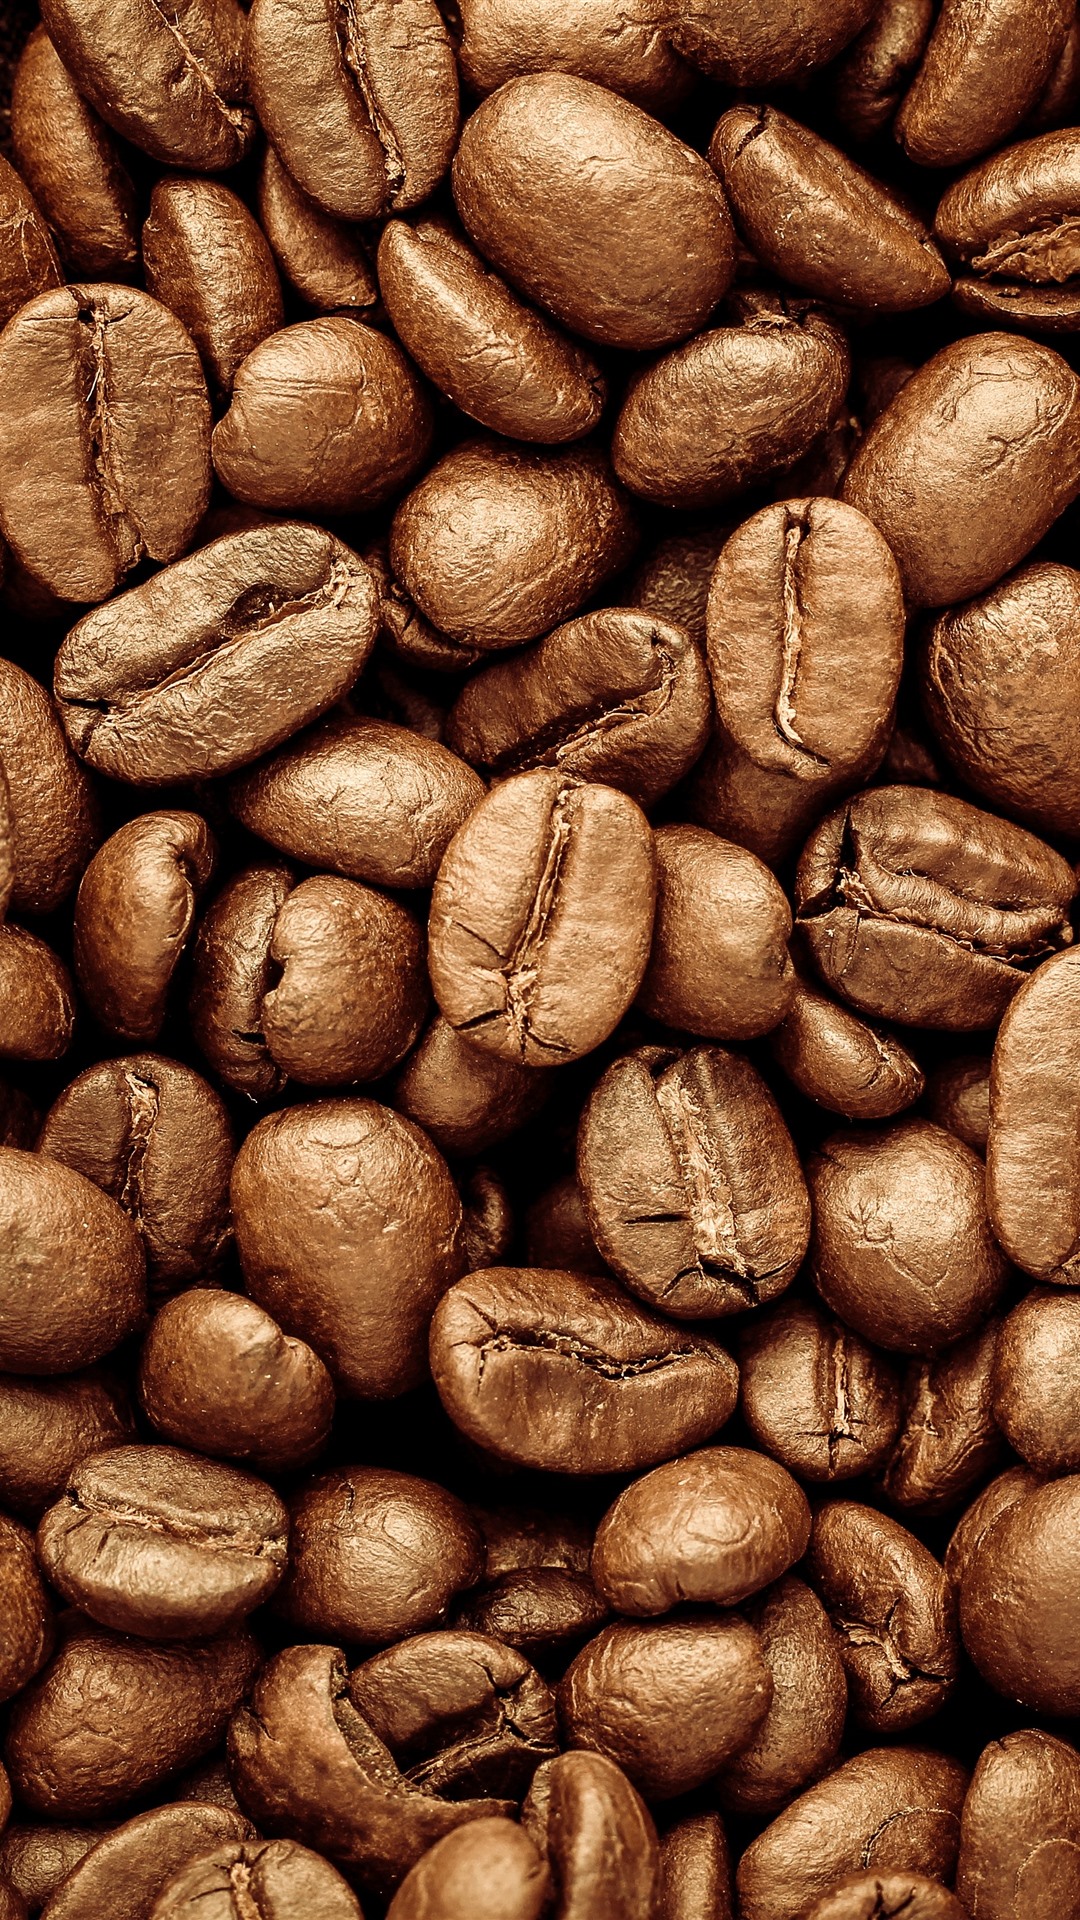 Wallpaper Many coffee beans 5120x2880 UHD 5K Picture, Image